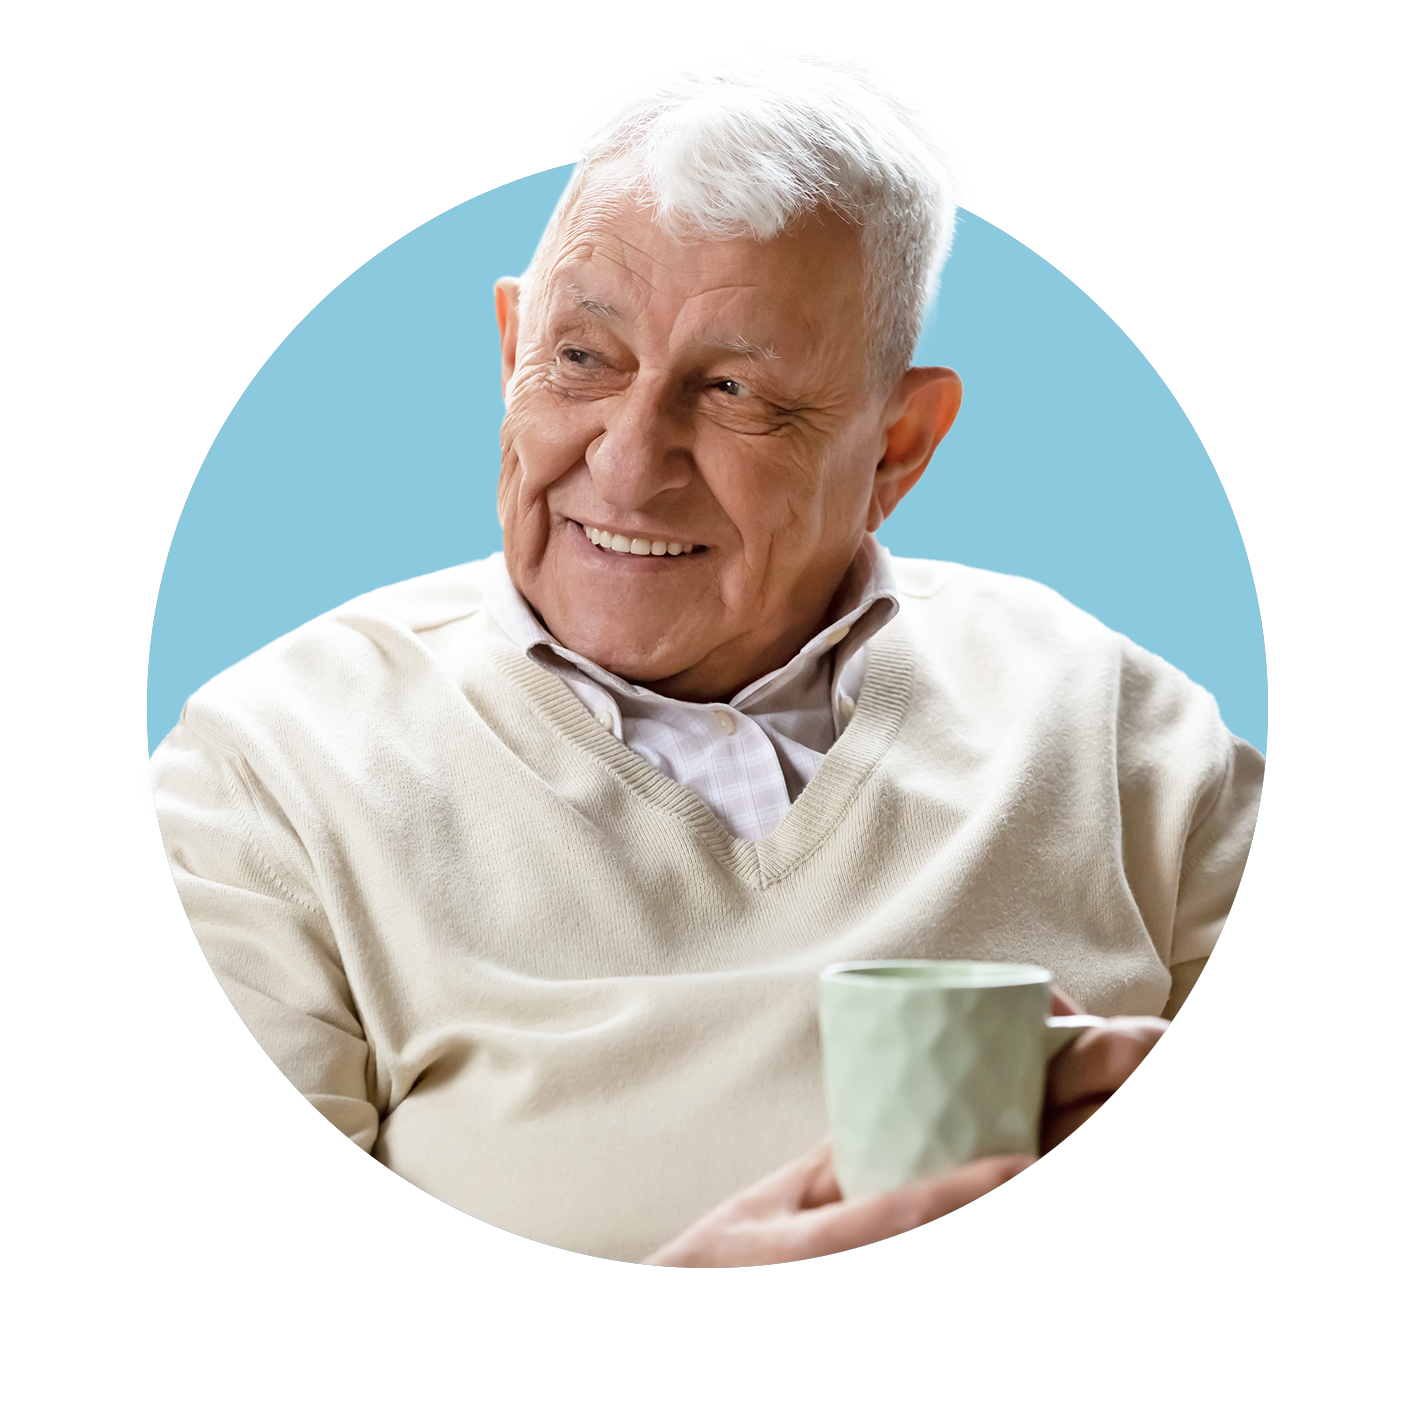 Elderly male smiling holding a cup of tea